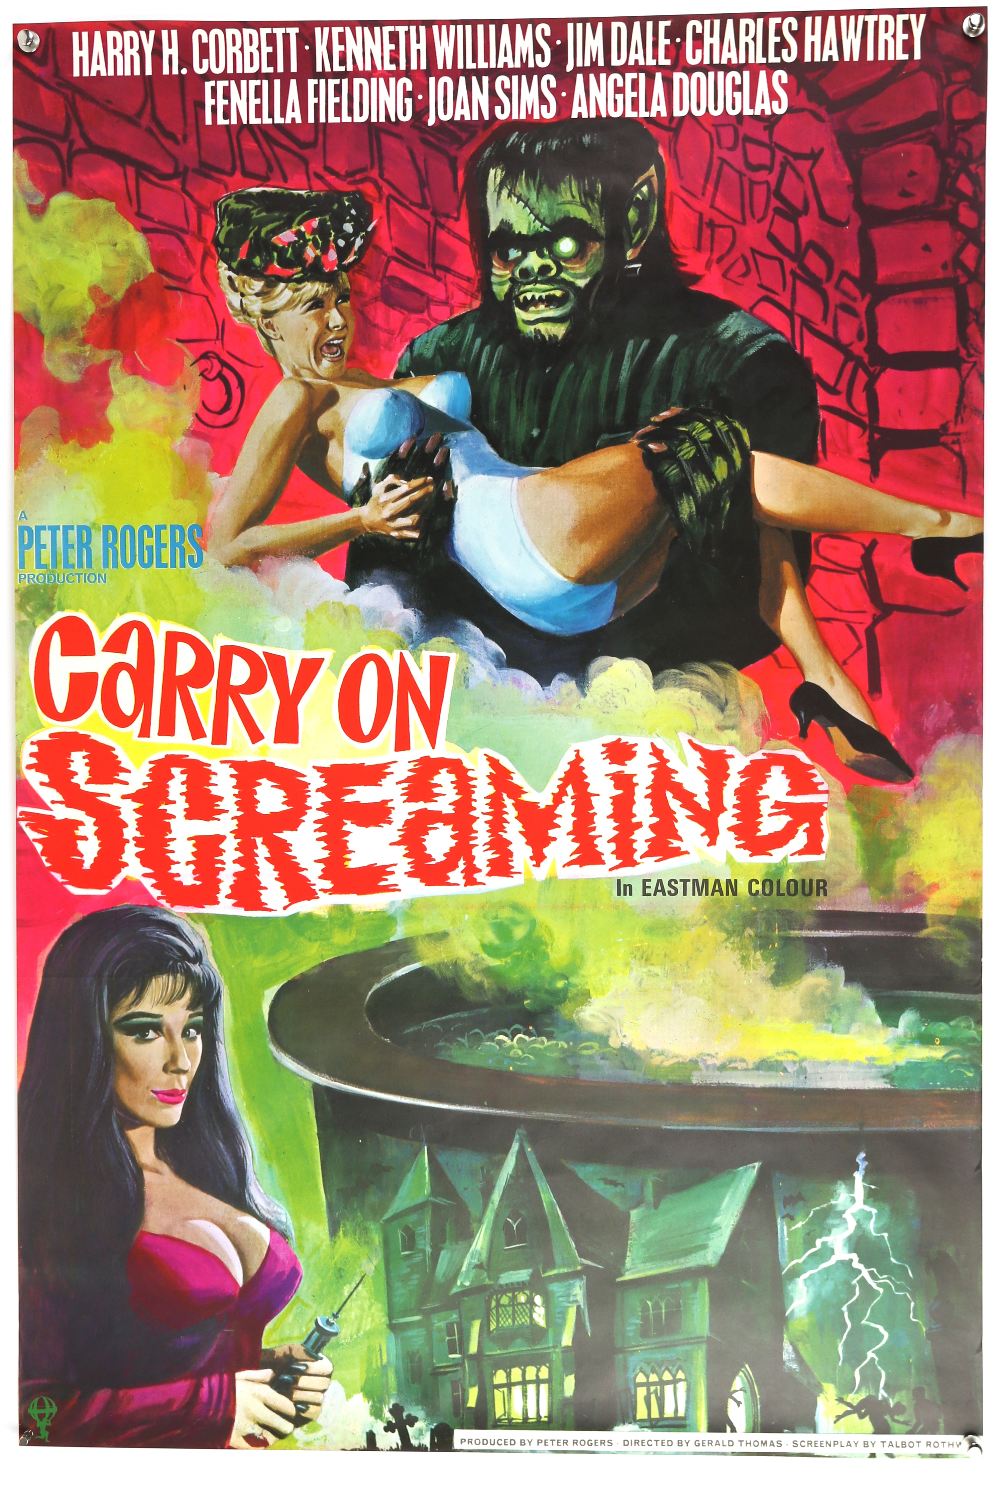 Carry On Screaming (1966) UK One Sheet film poster, artwork by Tom Chantrell, starring Kenneth